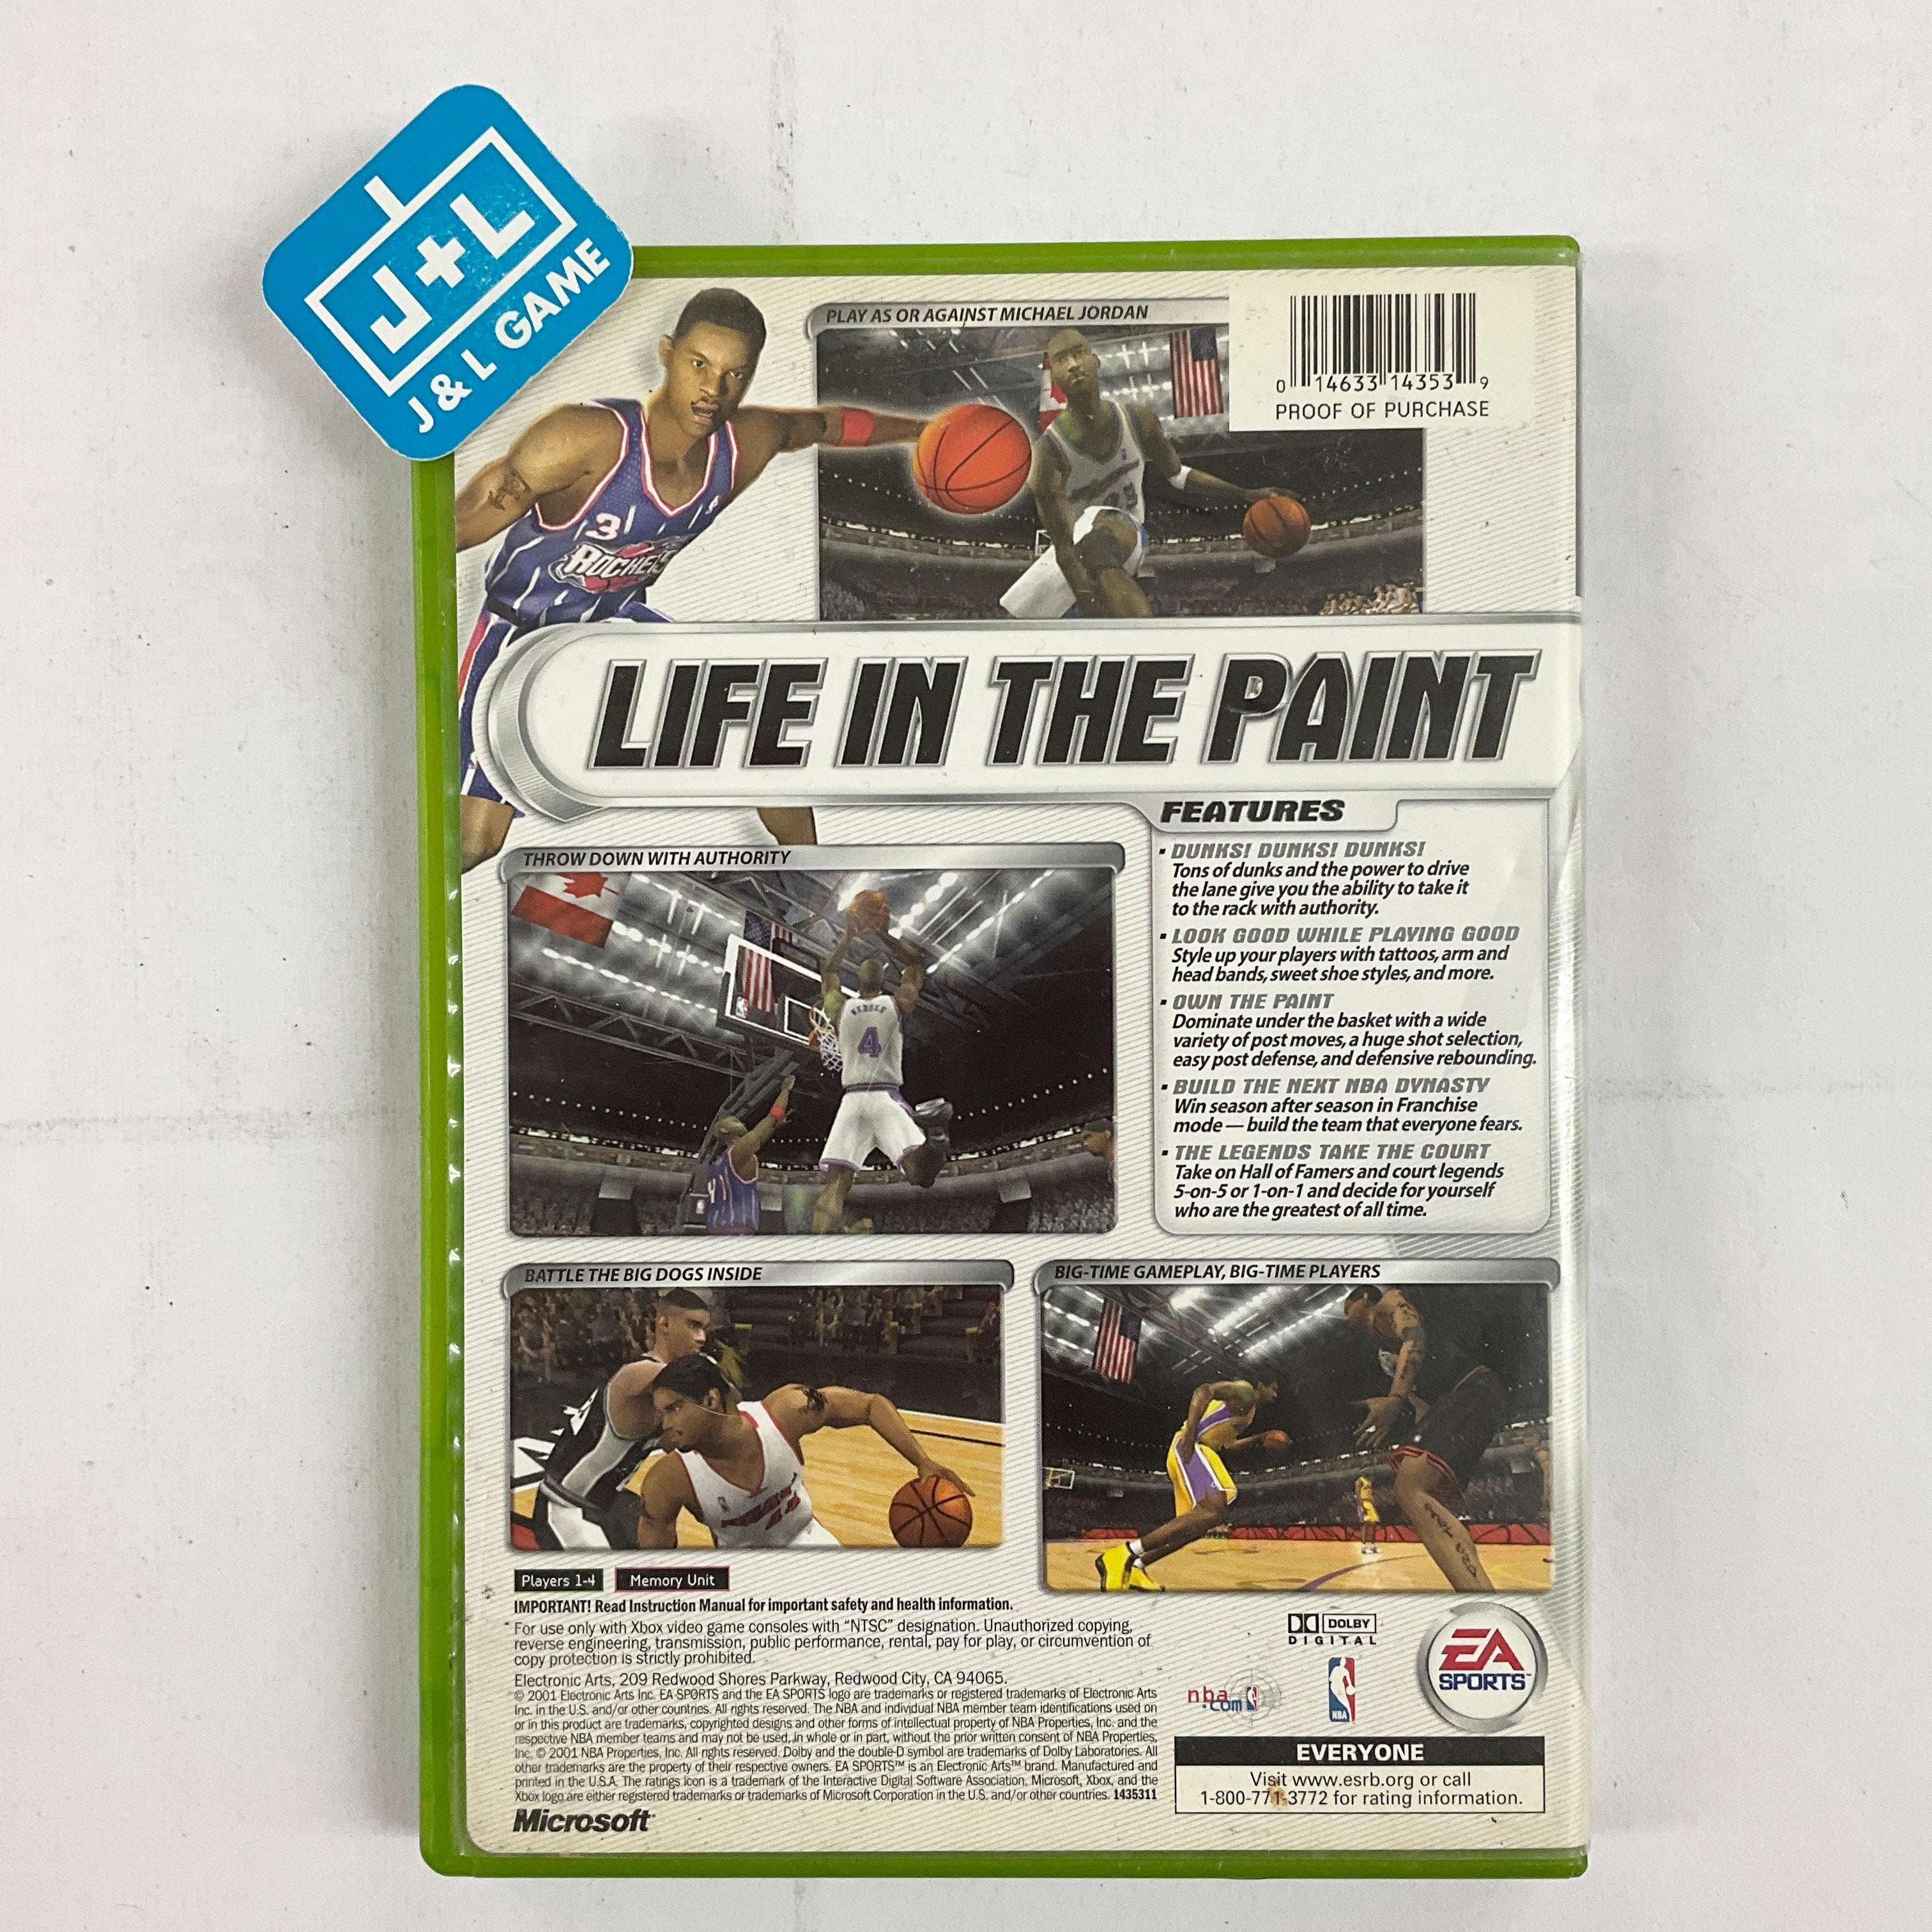 NBA Live 2002 - (XB) Xbox [Pre-Owned] Video Games Electronic Arts   